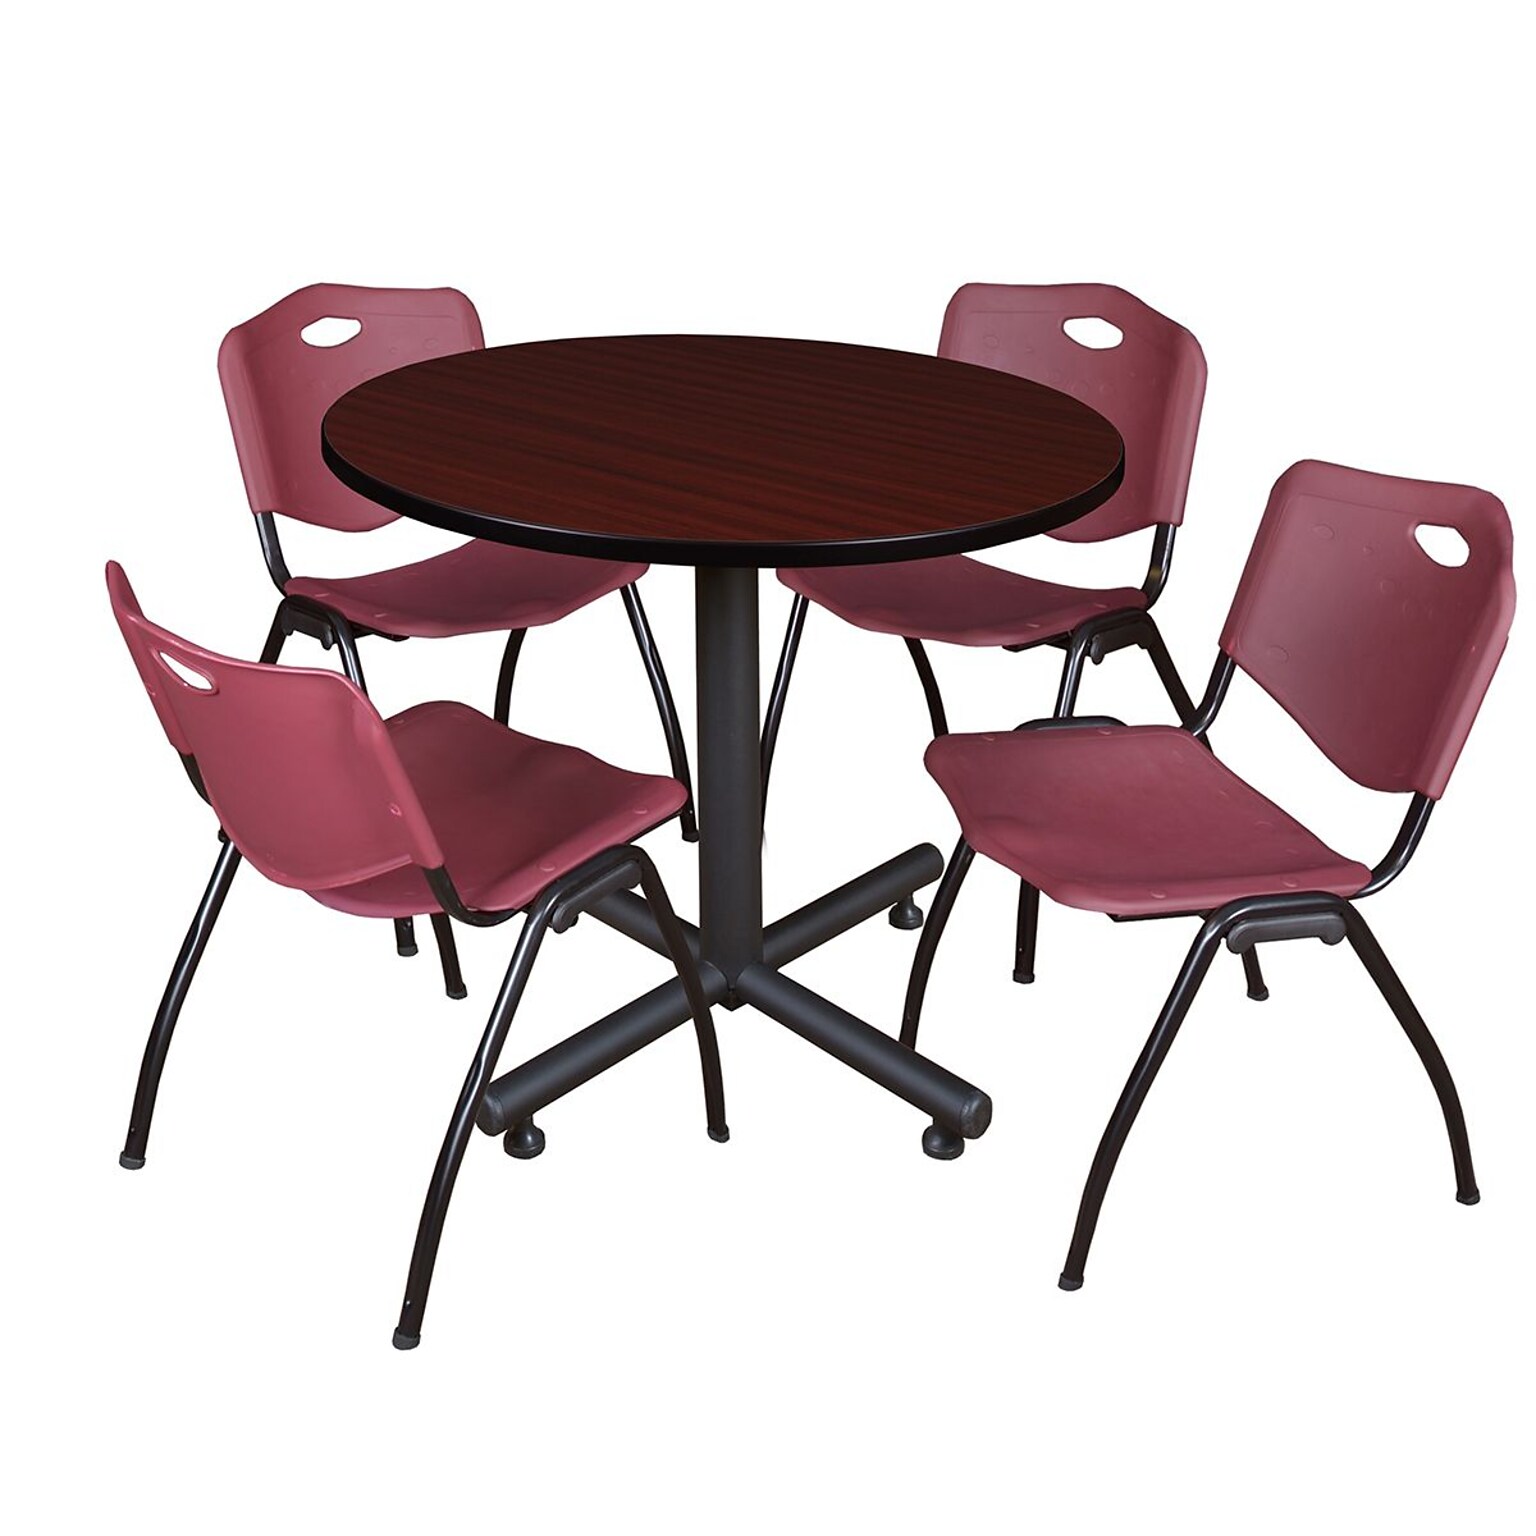 Regency 42-inch Round Laminate Mahogany Training Rooms Table With 4 M Stacker Chairs, Burgundy (TKB42RNDMH47BY)